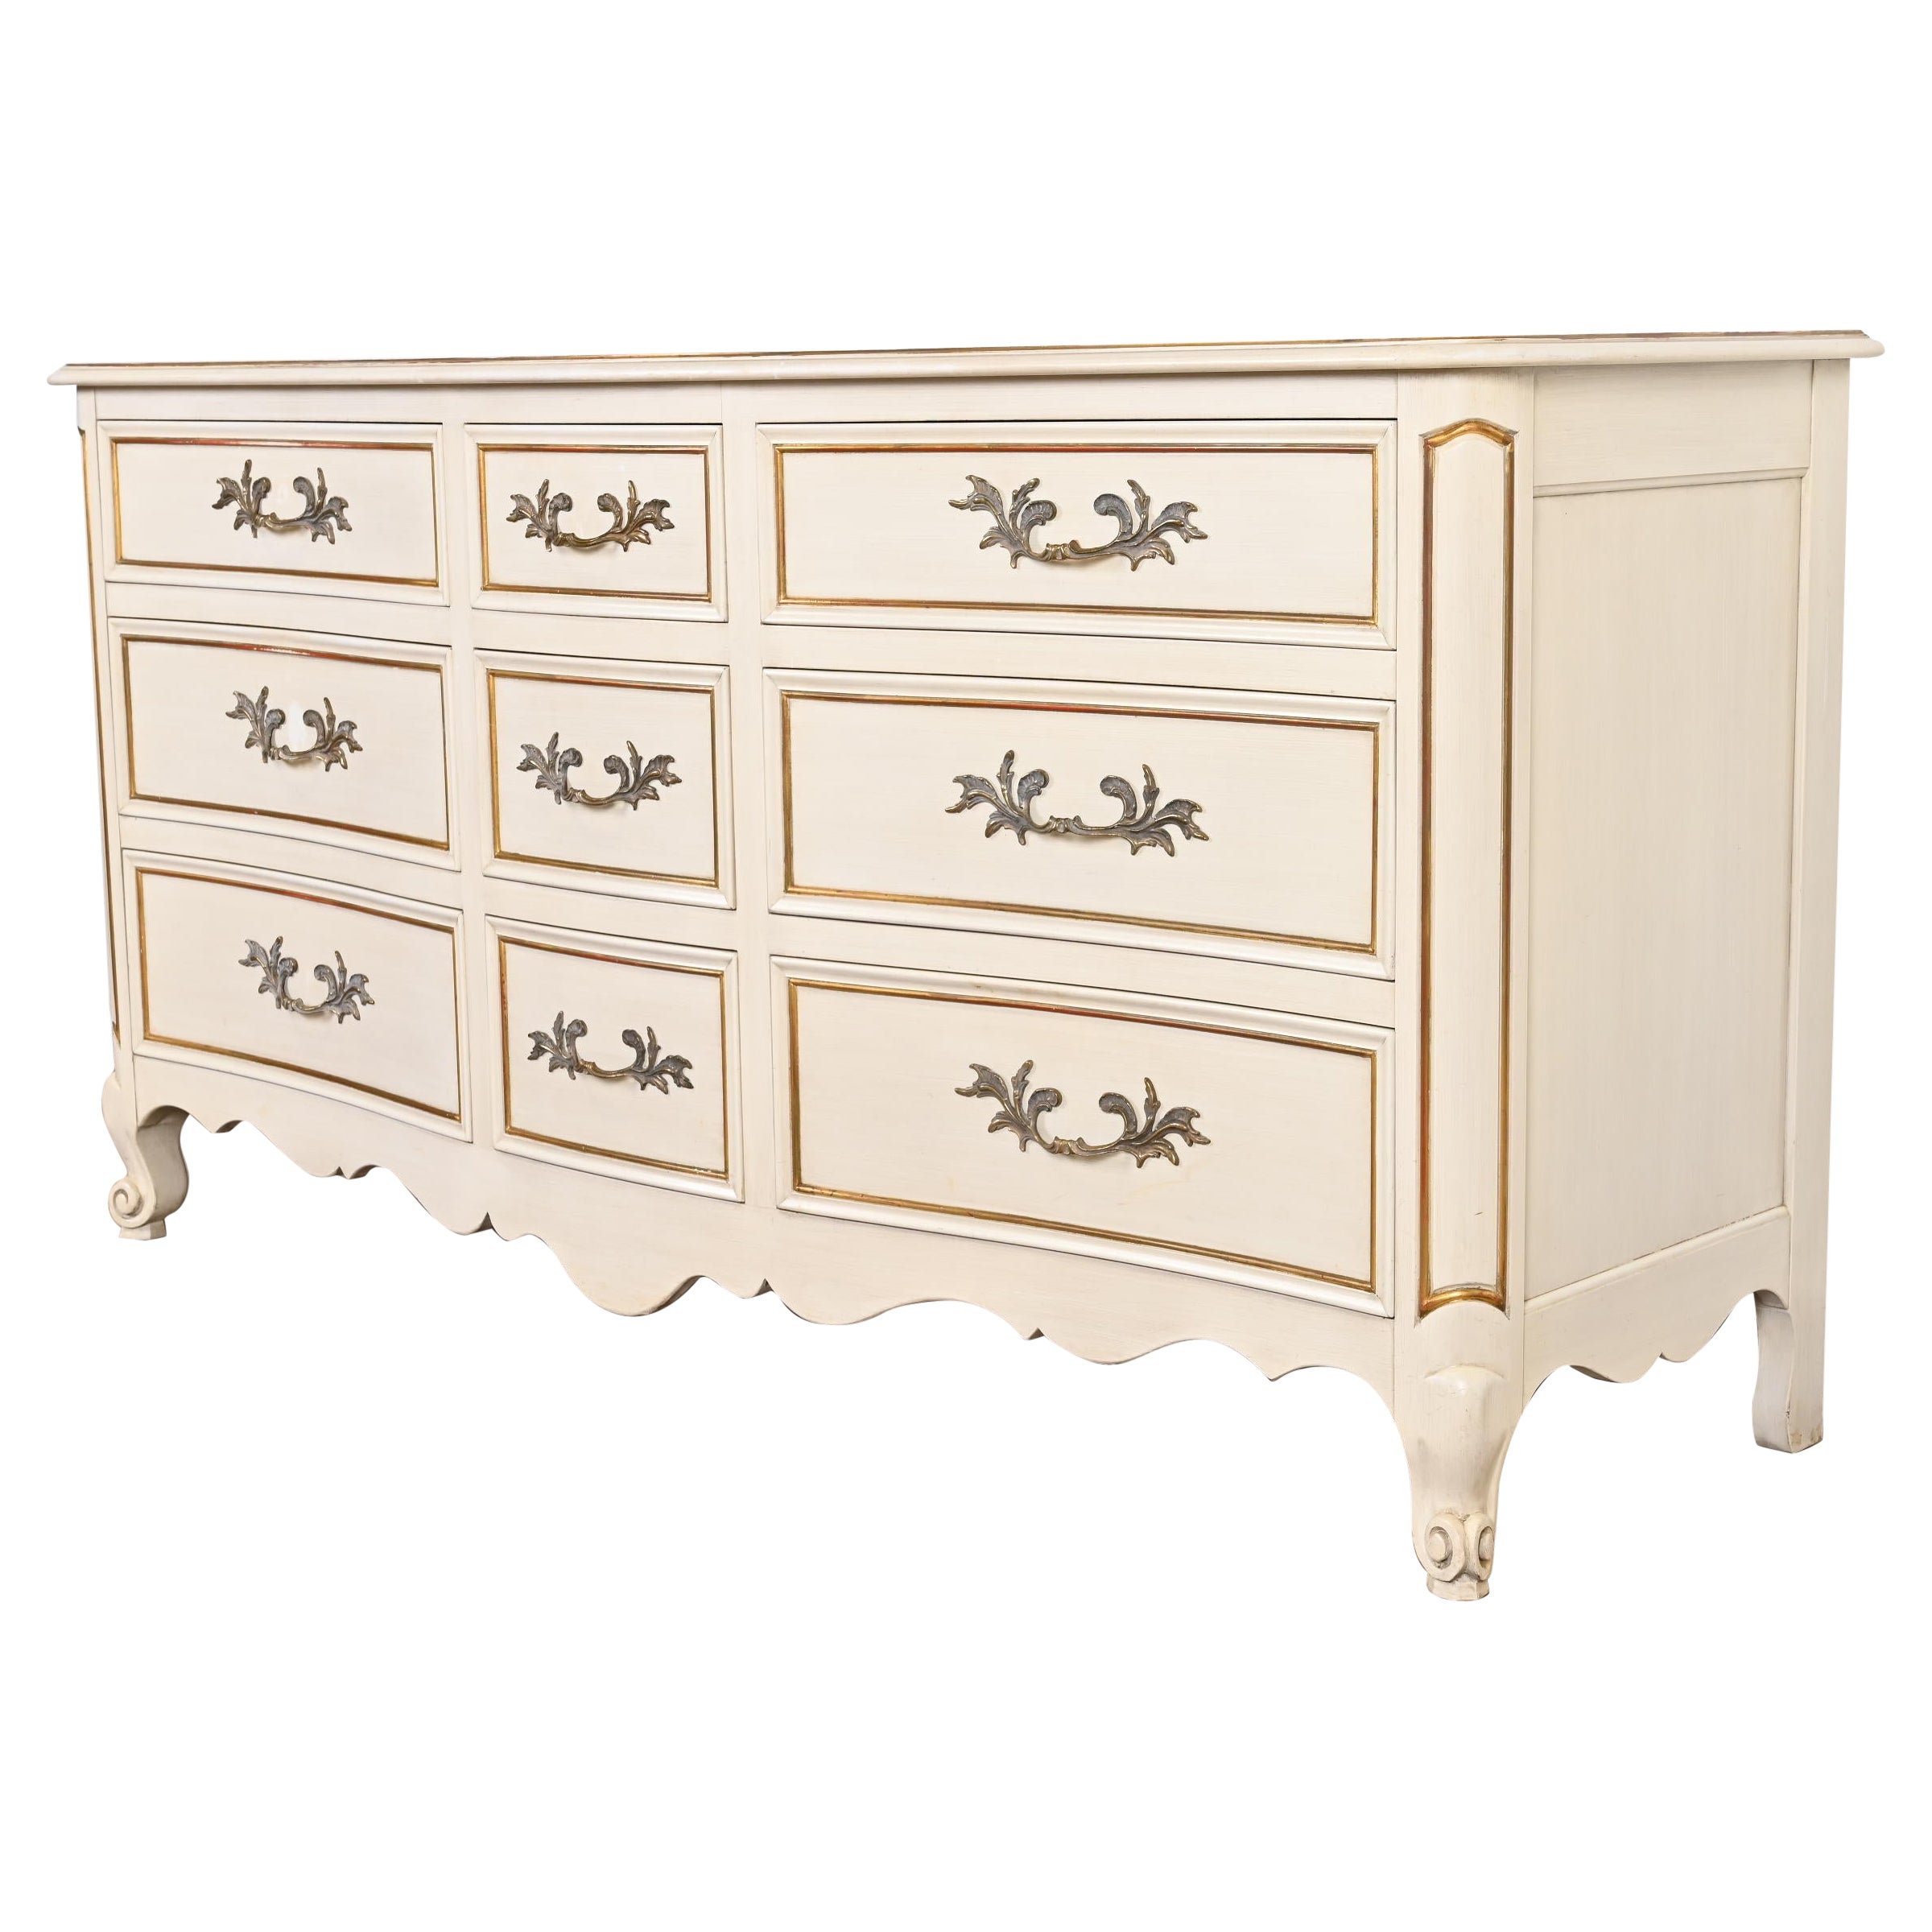 Kindel Furniture French Provincial Louis XV Triple Dresser, circa 1960s For Sale